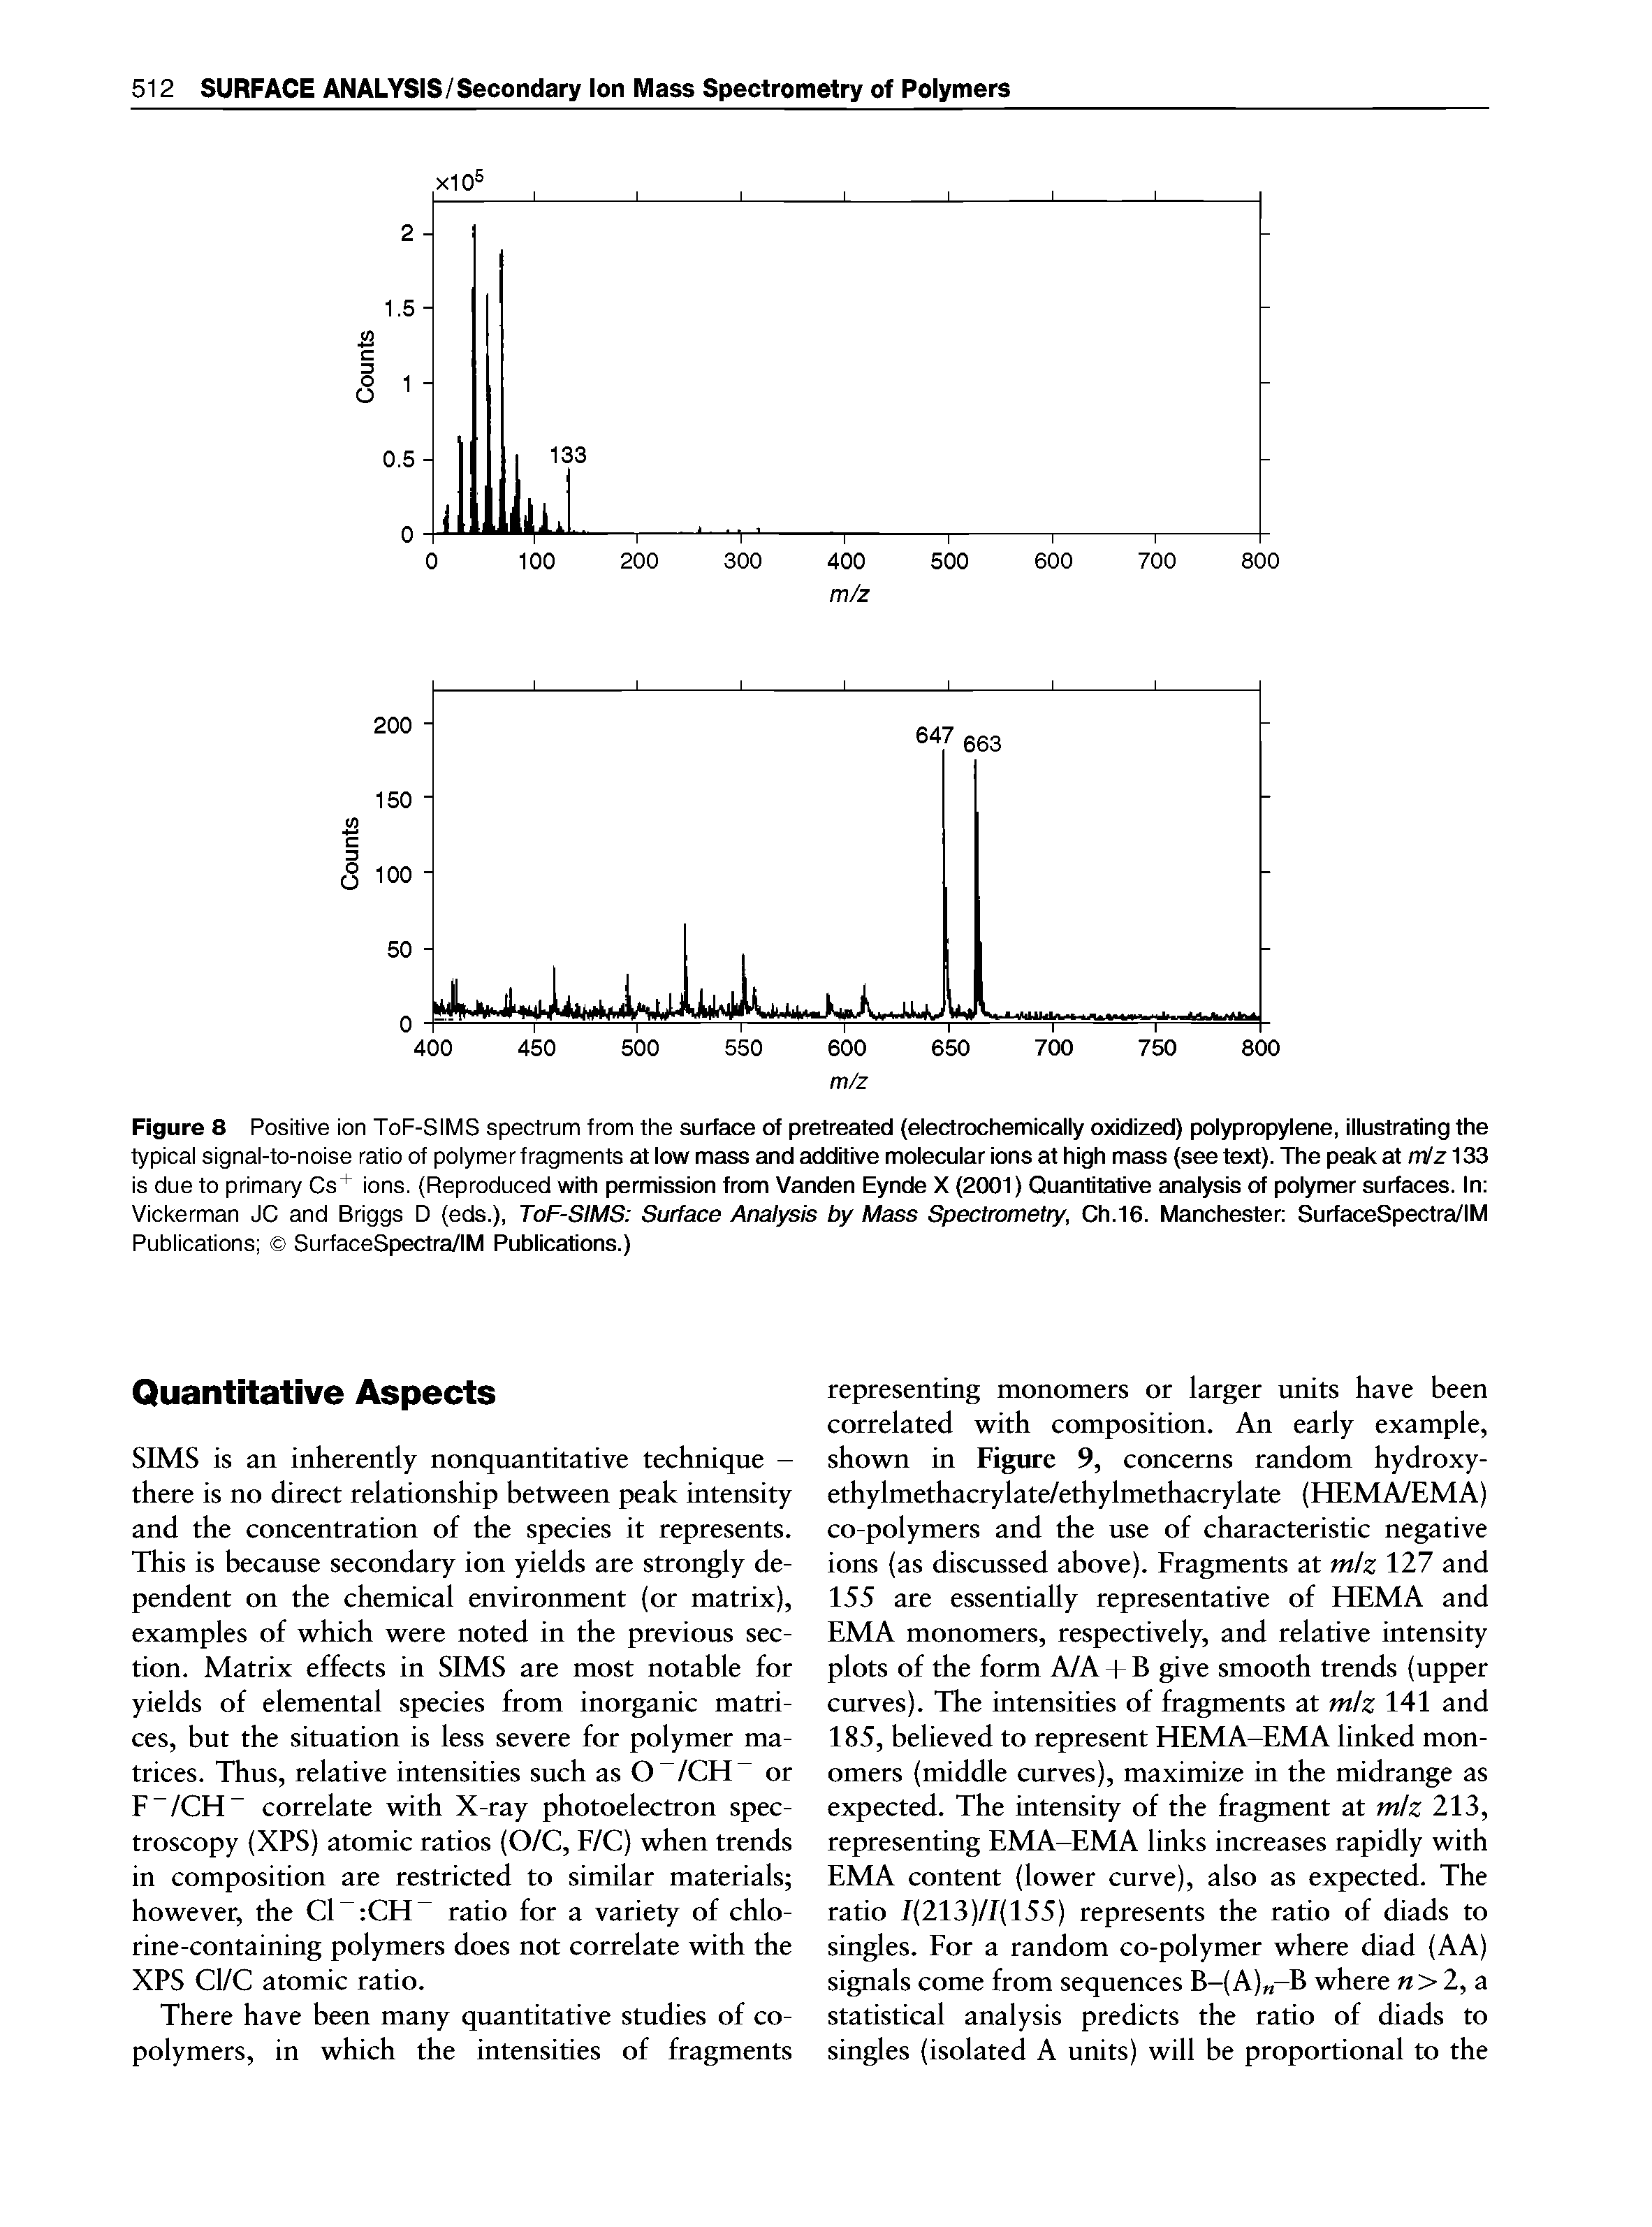 Figure 8 Positive ion ToF-SiMS spectrum from the surface of pretreated (electrochemically oxidized) polypropylene, illustrating the typicai signai-to-noise ratio of poiymer fragments at low mass and additive molecular ions at high mass (see text). The peak at nVz133 is due to primary Cs+ ions. Reproduced with permission from Vanden Eynde X (2001) Quantitative analysis of polymer surfaces. In Vickerman JC and Briggs D (eds.), ToF-SIMS Surface Analysis by Mass Spectrometry, Ch.16. Manchester SurfaceSpectra/IM Pubiications SurfaceSpectra/IM Publications.)...